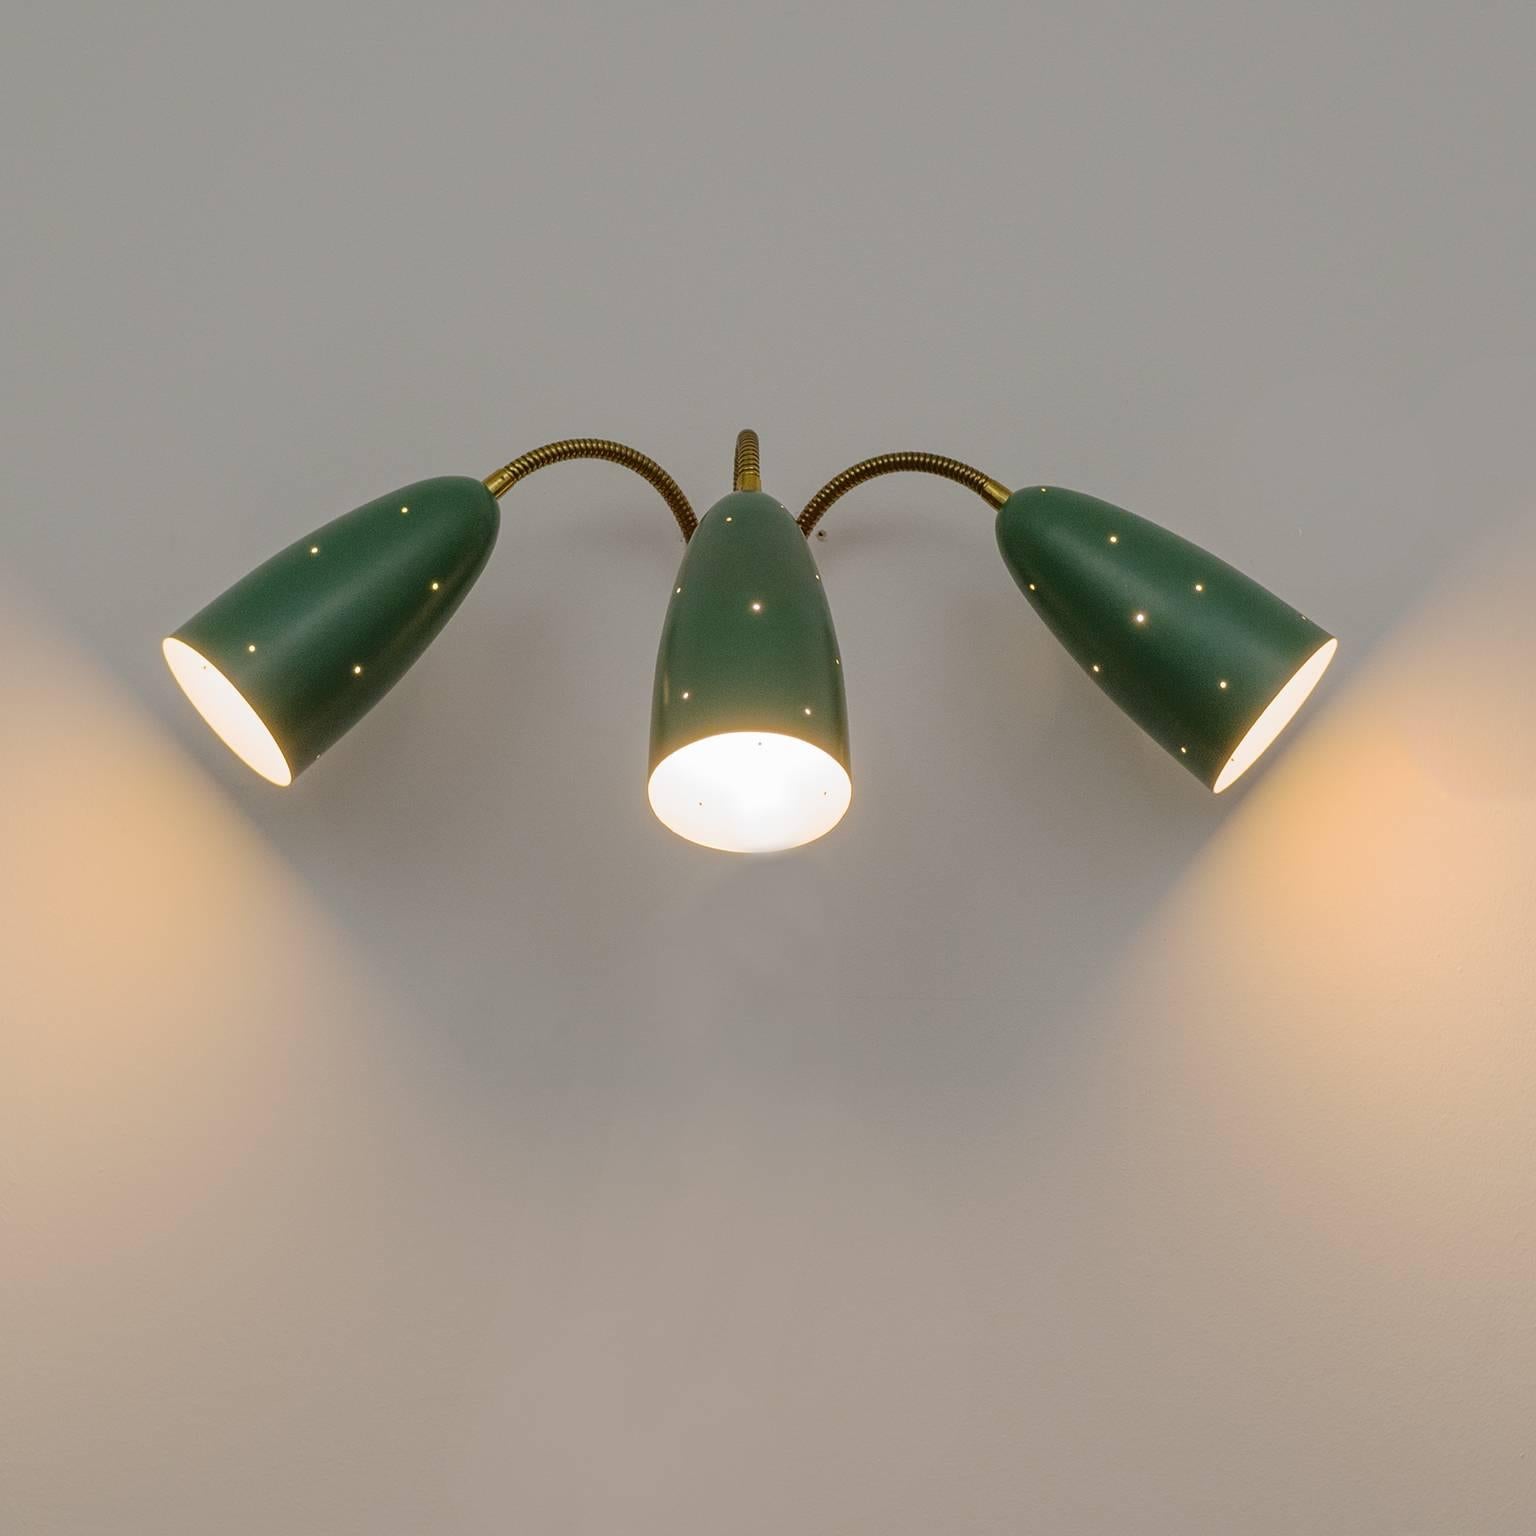 Large Three-Arm Wall Light with Pierced Green Cones, 1950s 1